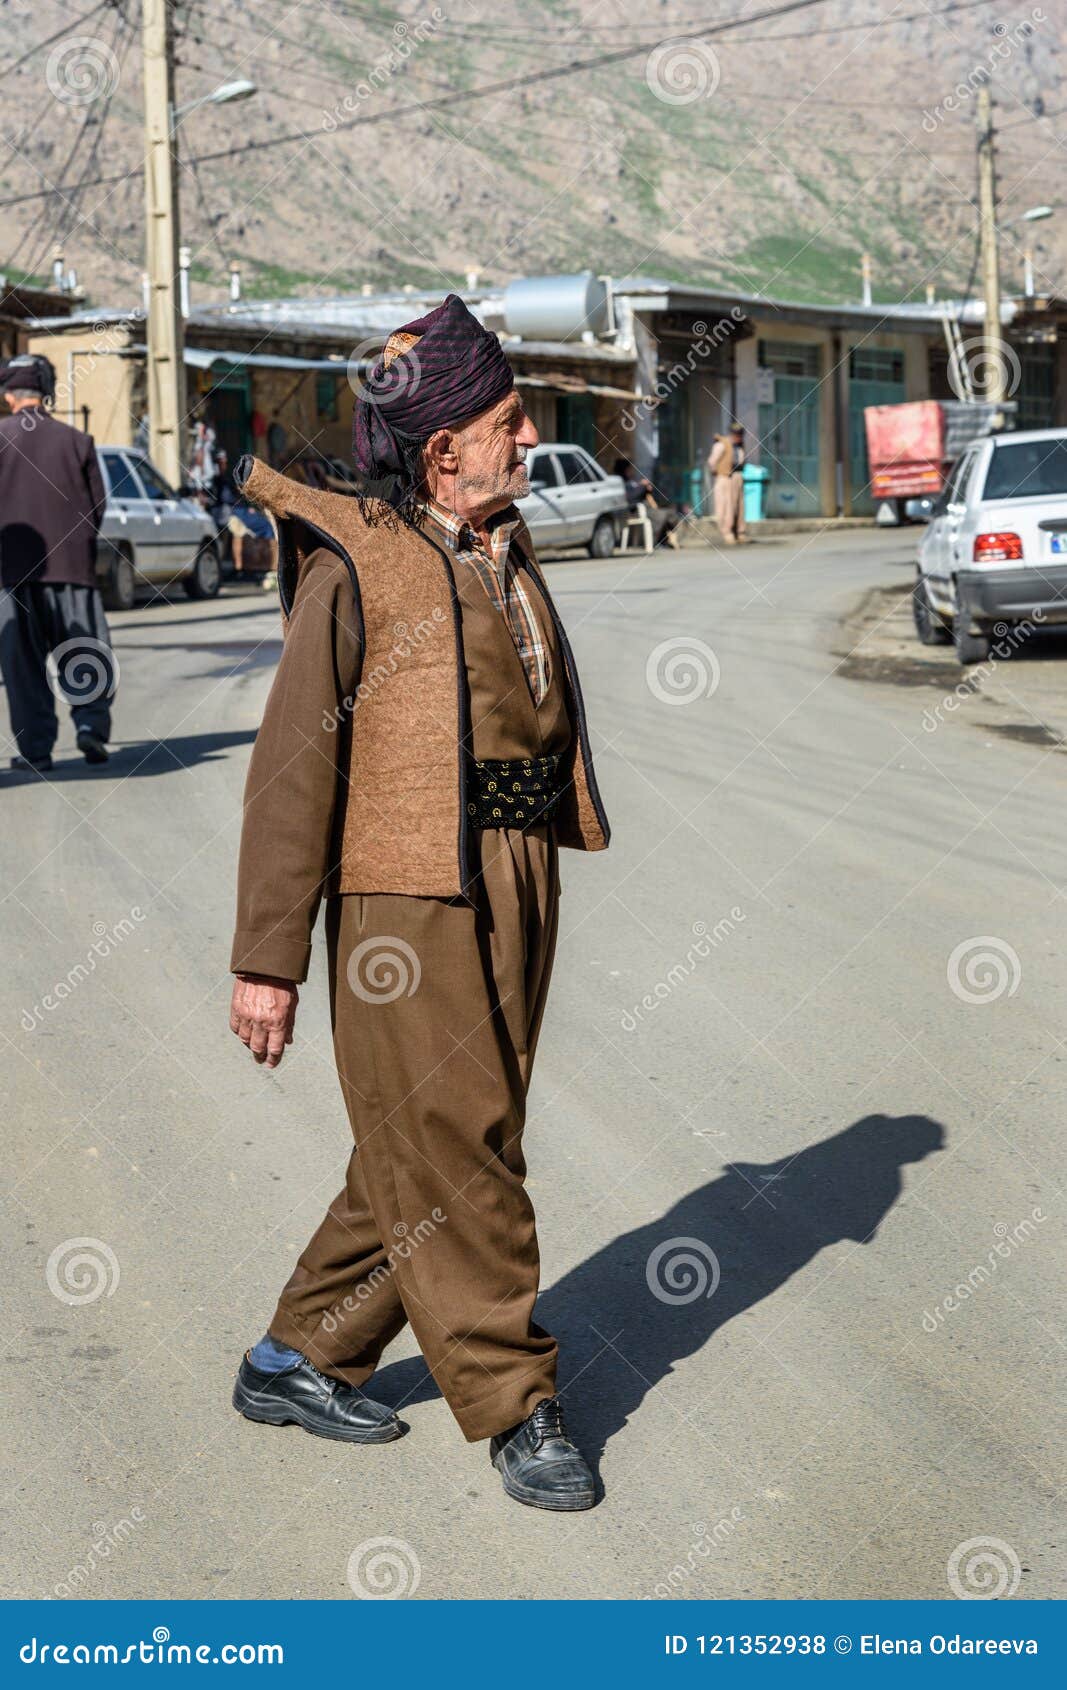 Kurdish Man In Traditional Clothing On The Street Of